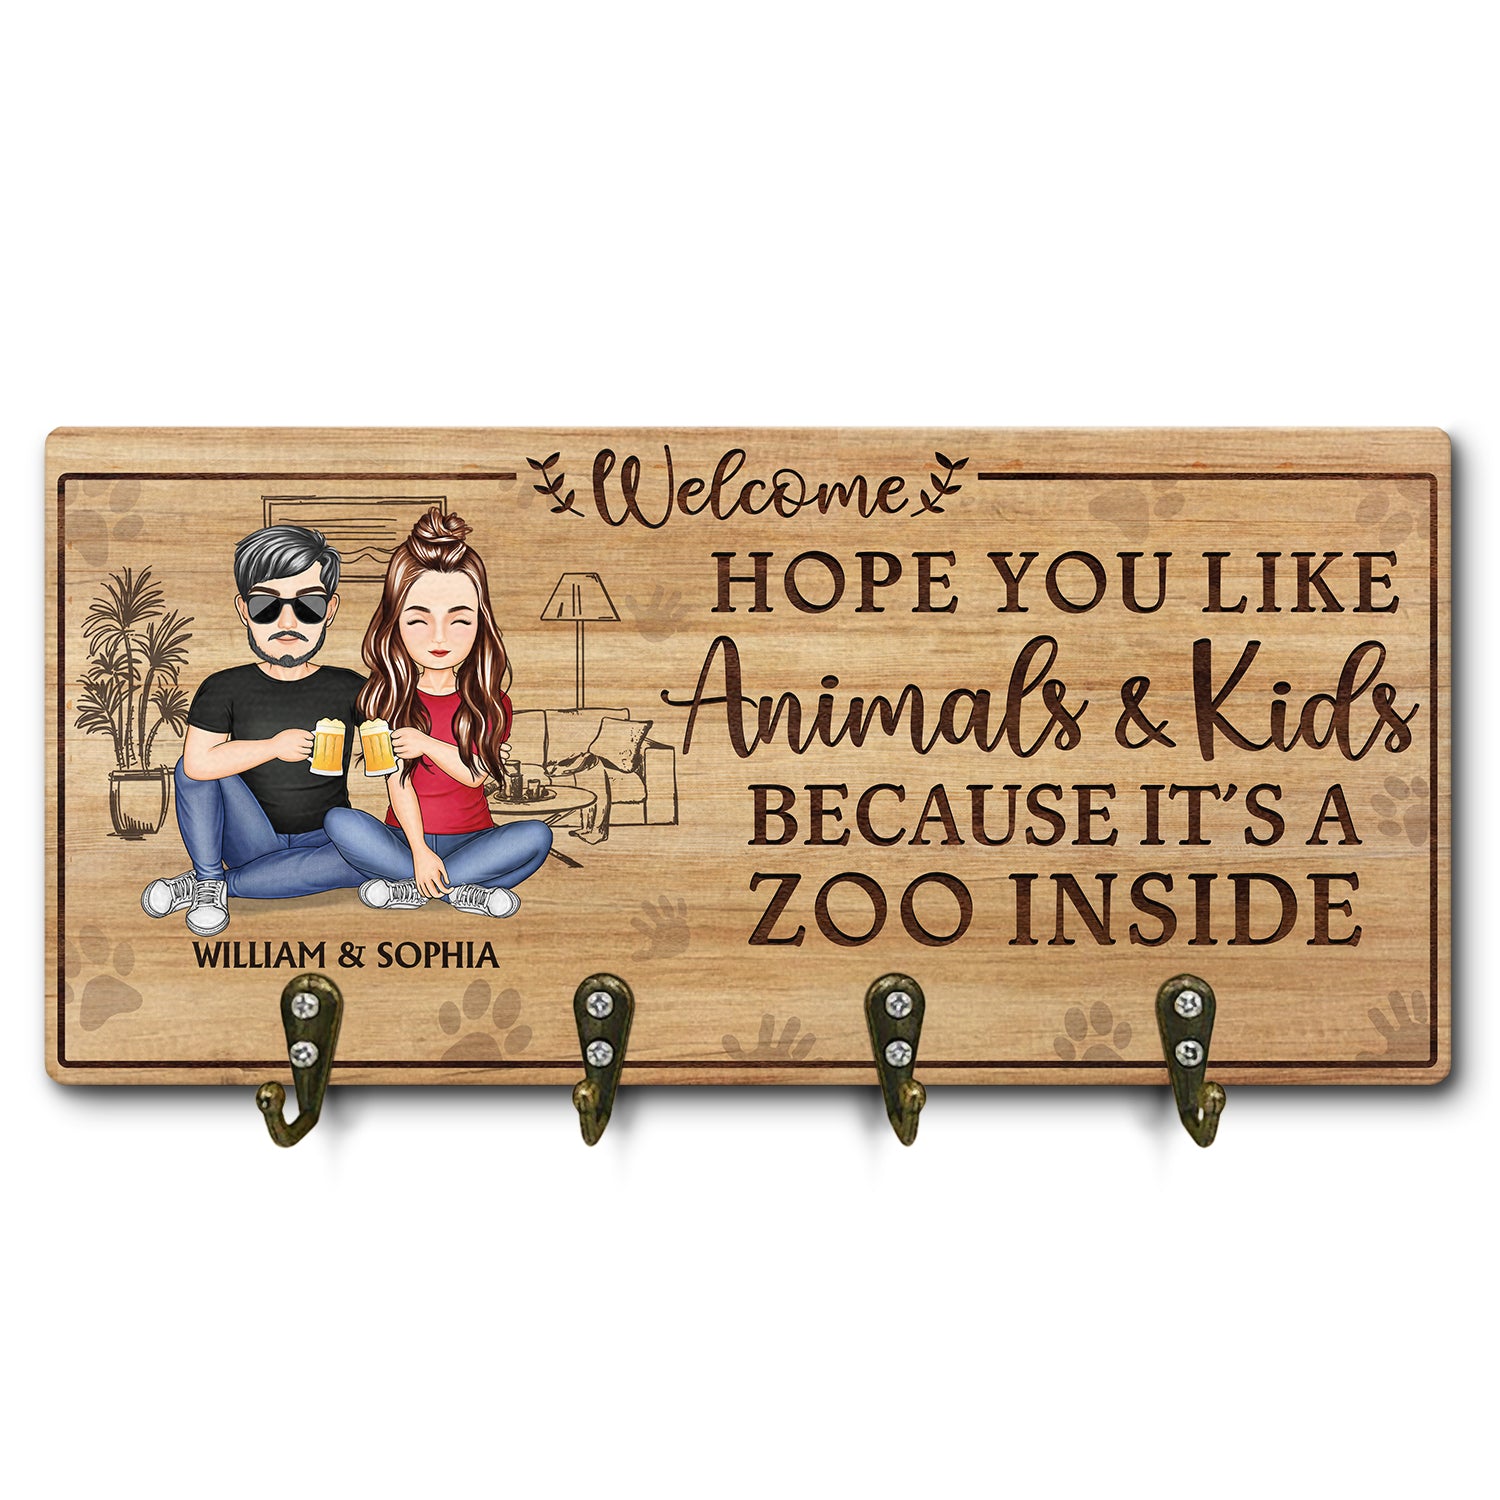 Hope You Like Animals And Kids - Anniversary, Birthday, Home Decor Gift For Spouse, Lover, Husband, Wife, Boyfriend, Girlfriend, Couple - Personalized Custom Wood Key Holder